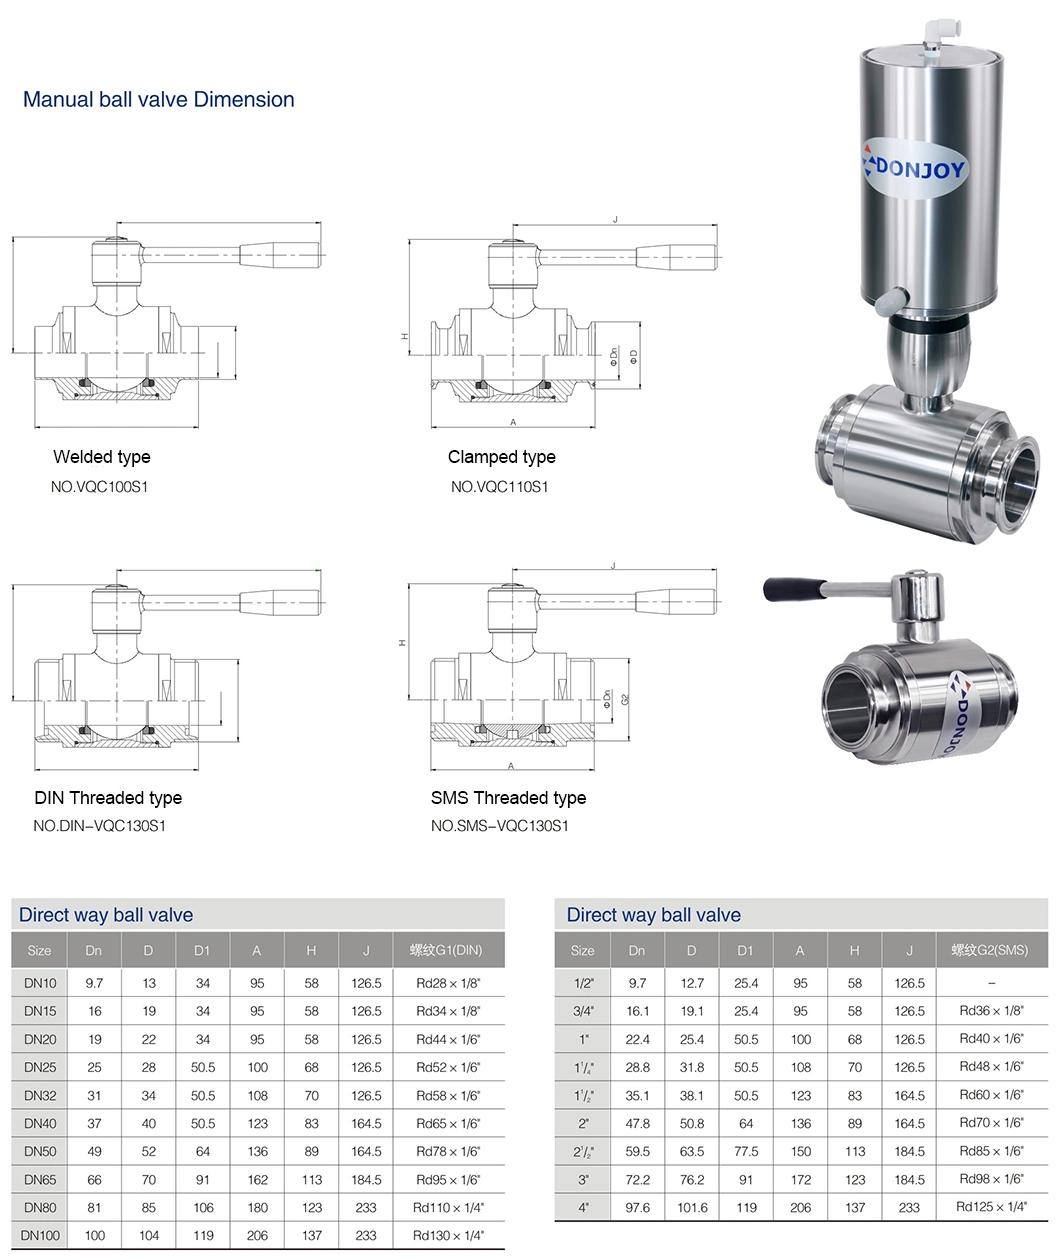 Us 3A Donjoy Sanitary Ball Valve with Control Top